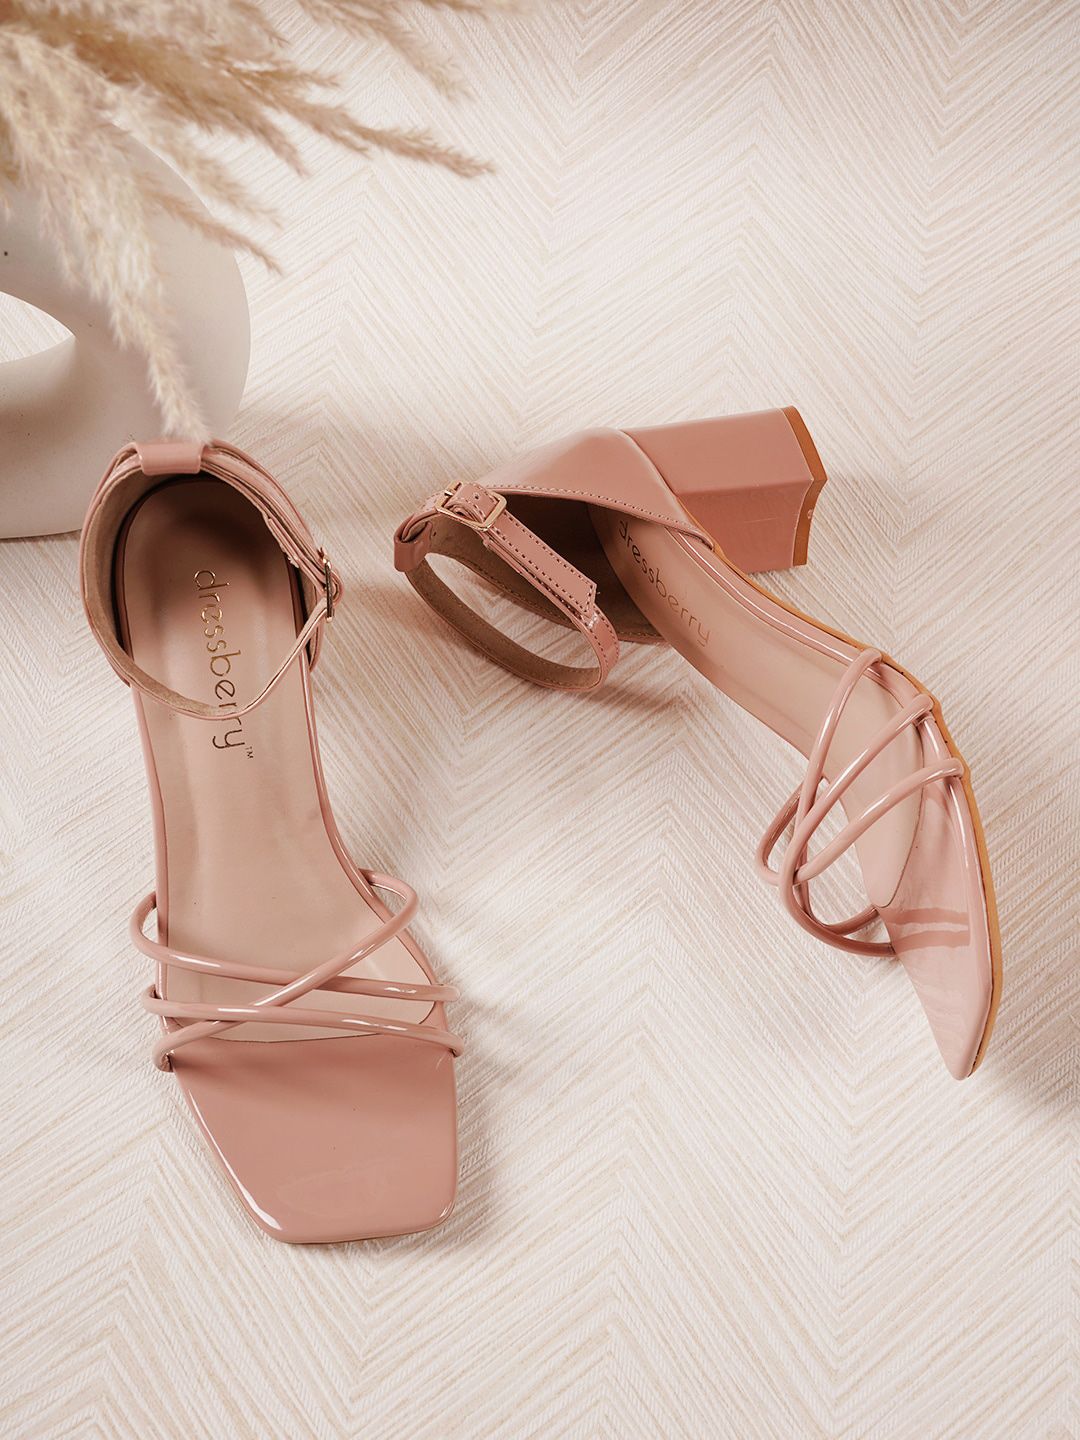 DressBerry Nude-Coloured Strappy Block Heels